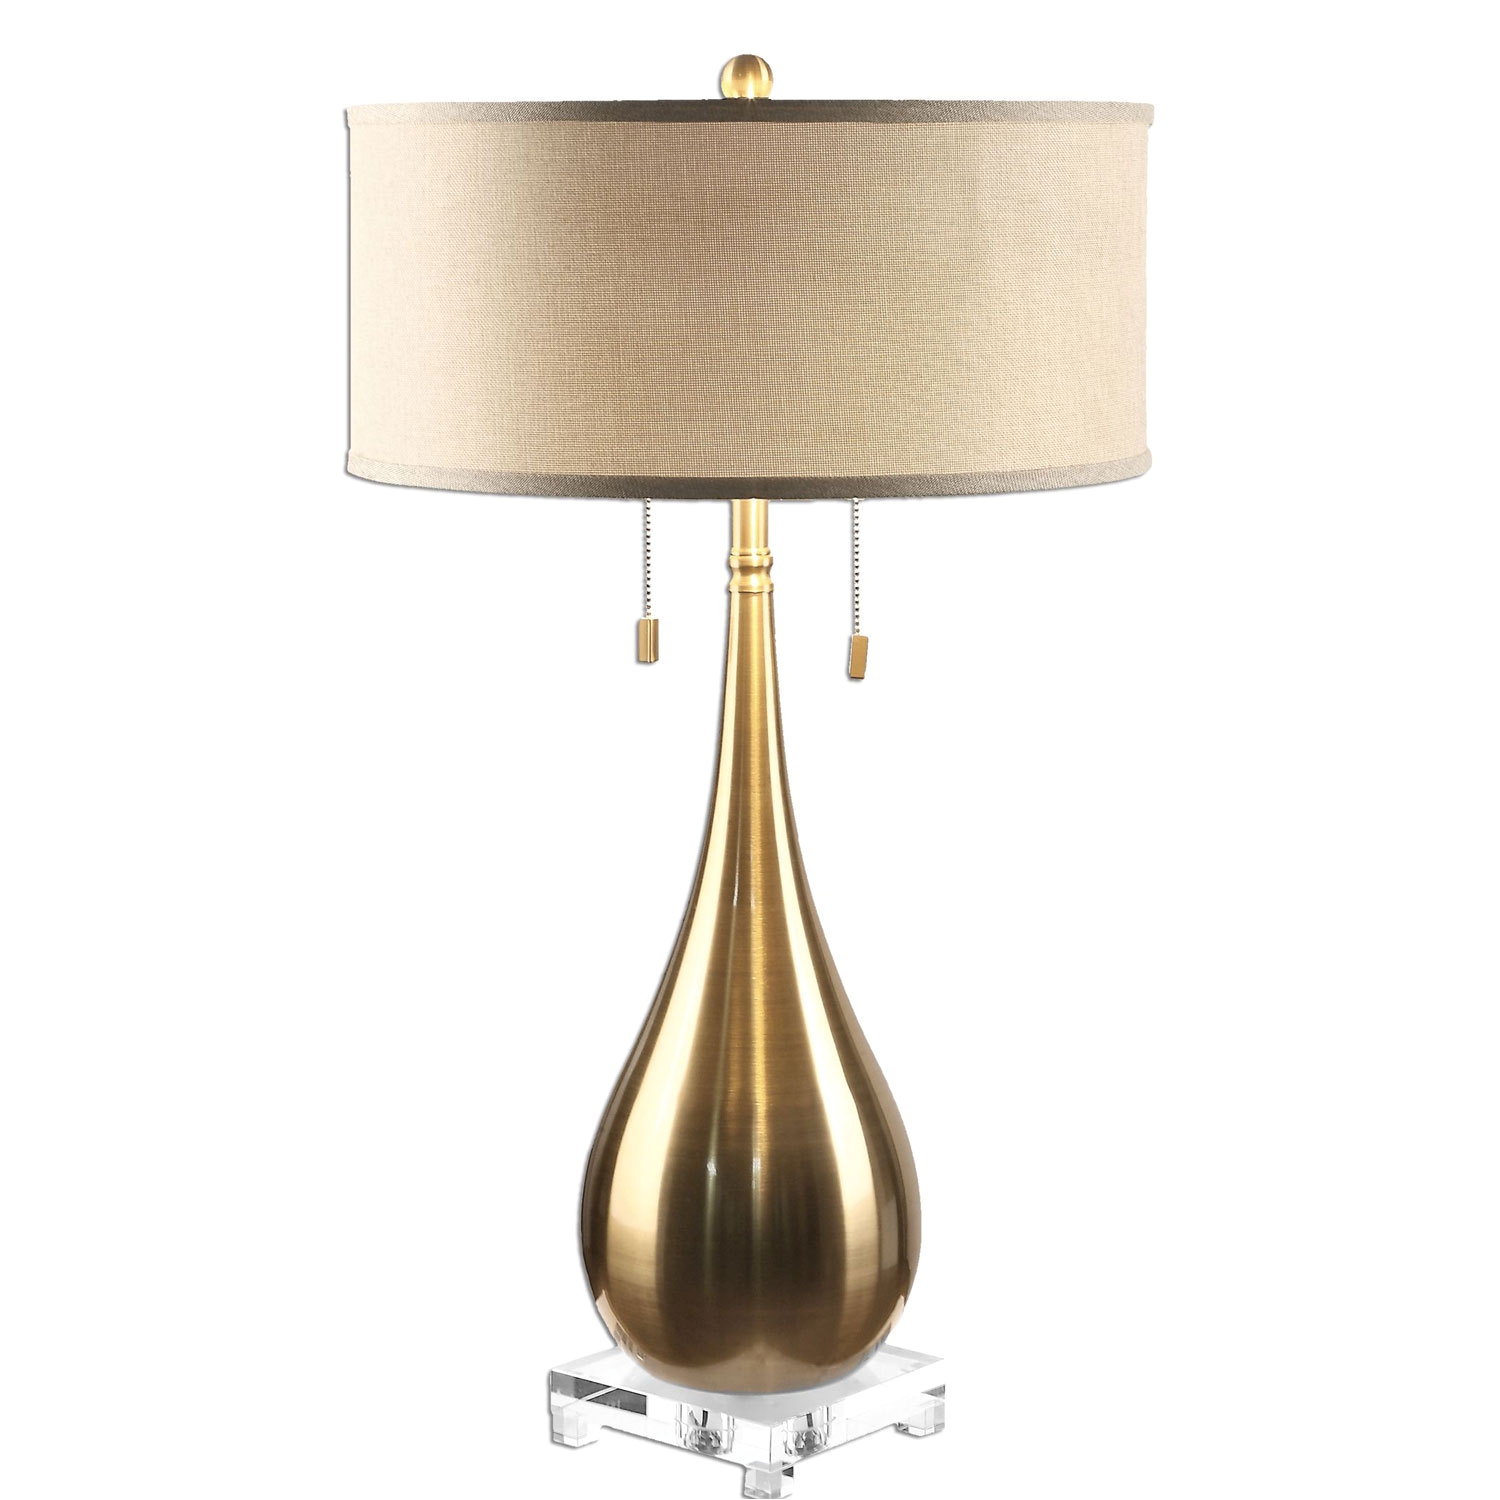 Bright Yellow Floor Lamp Uttermost Lagrima Brushed Brass Two Light Table Lamp 27048 1 Bellacor